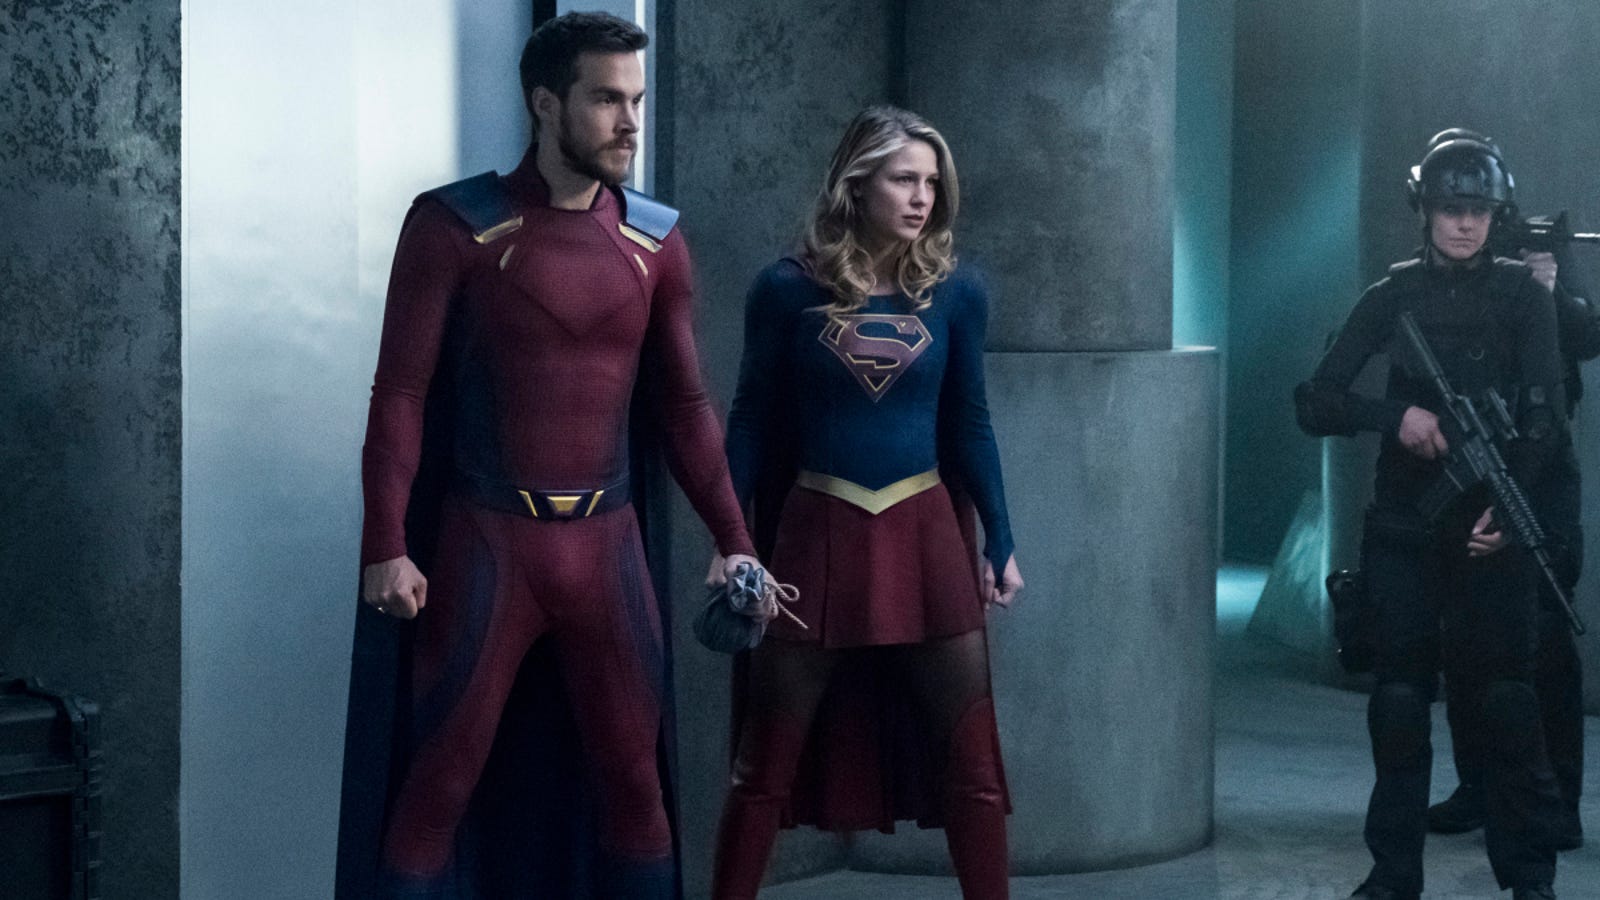 Supergirl S4 Ep7 Rather the Fallen Angel review